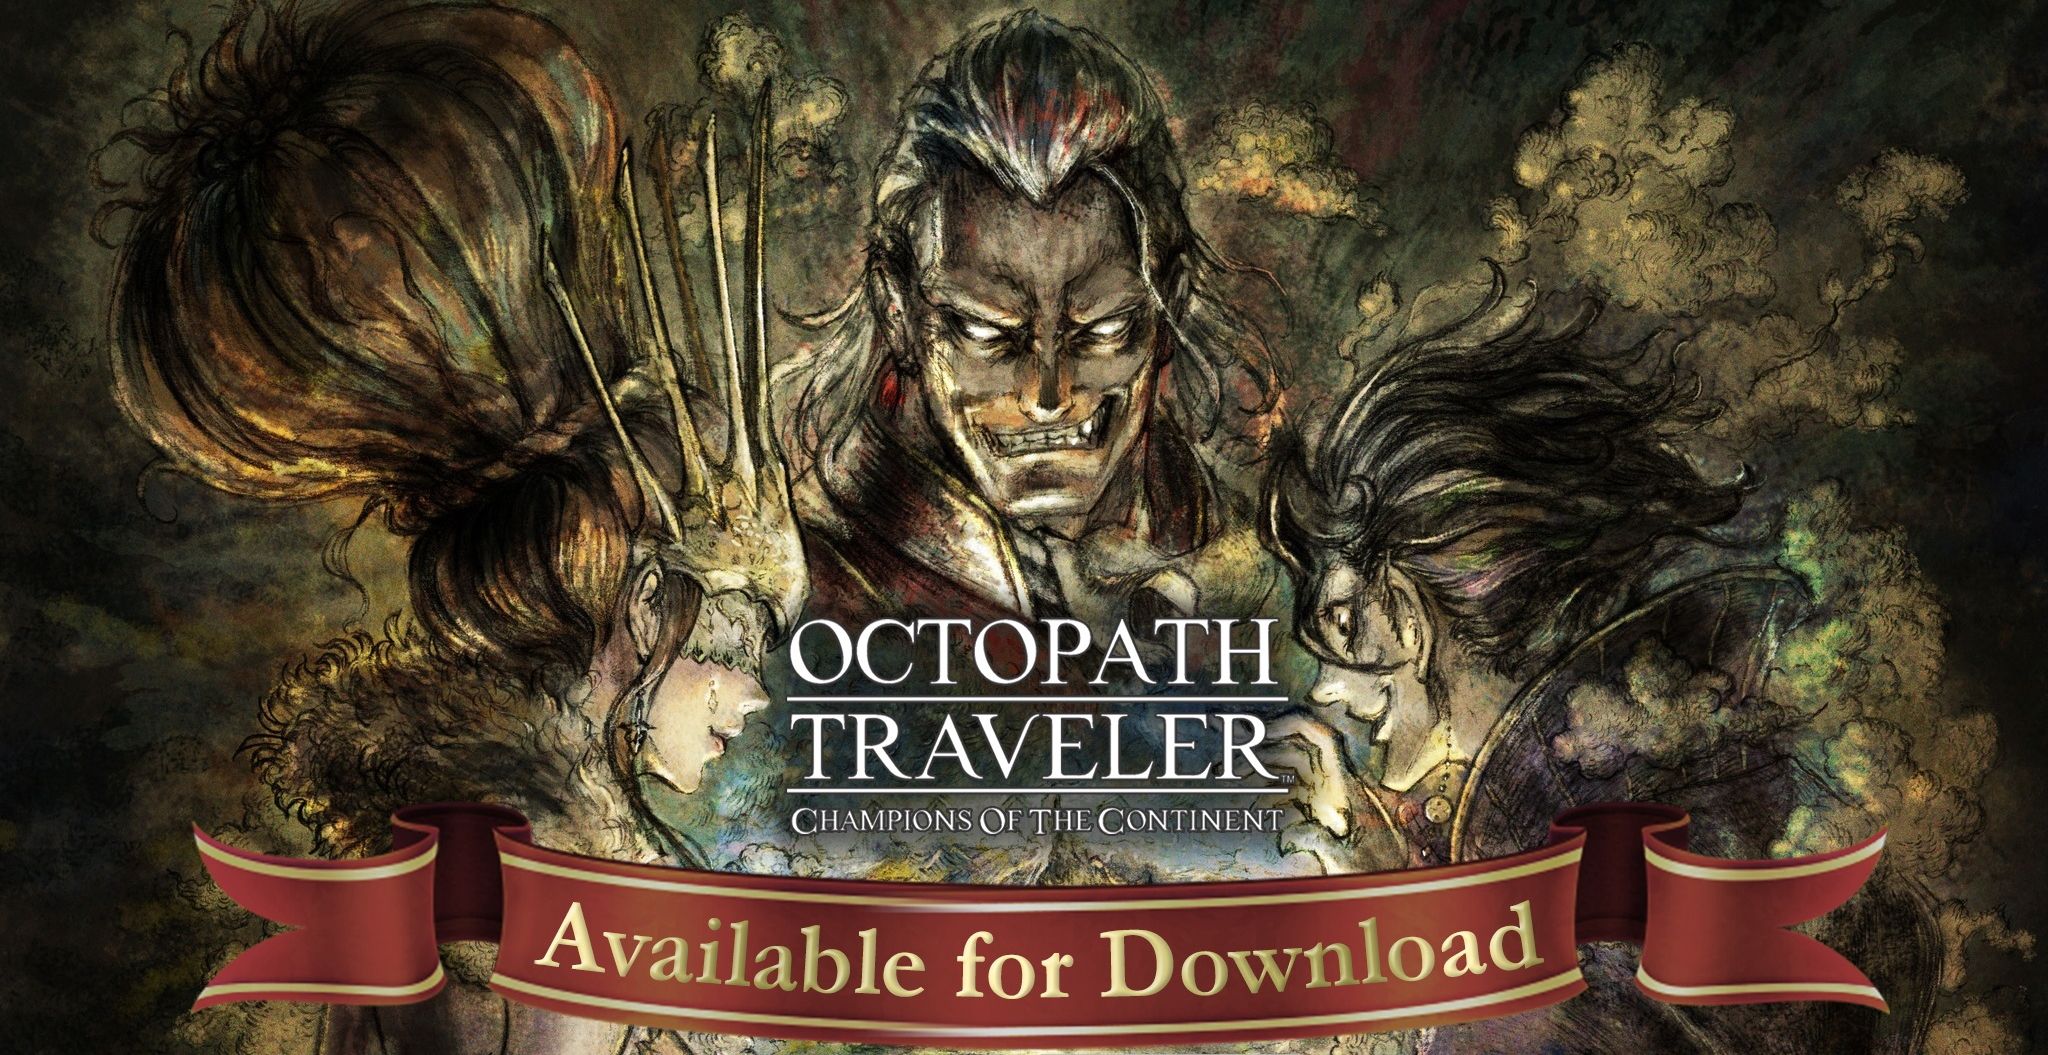 Octopath Traveler Champions of the Continent release hero